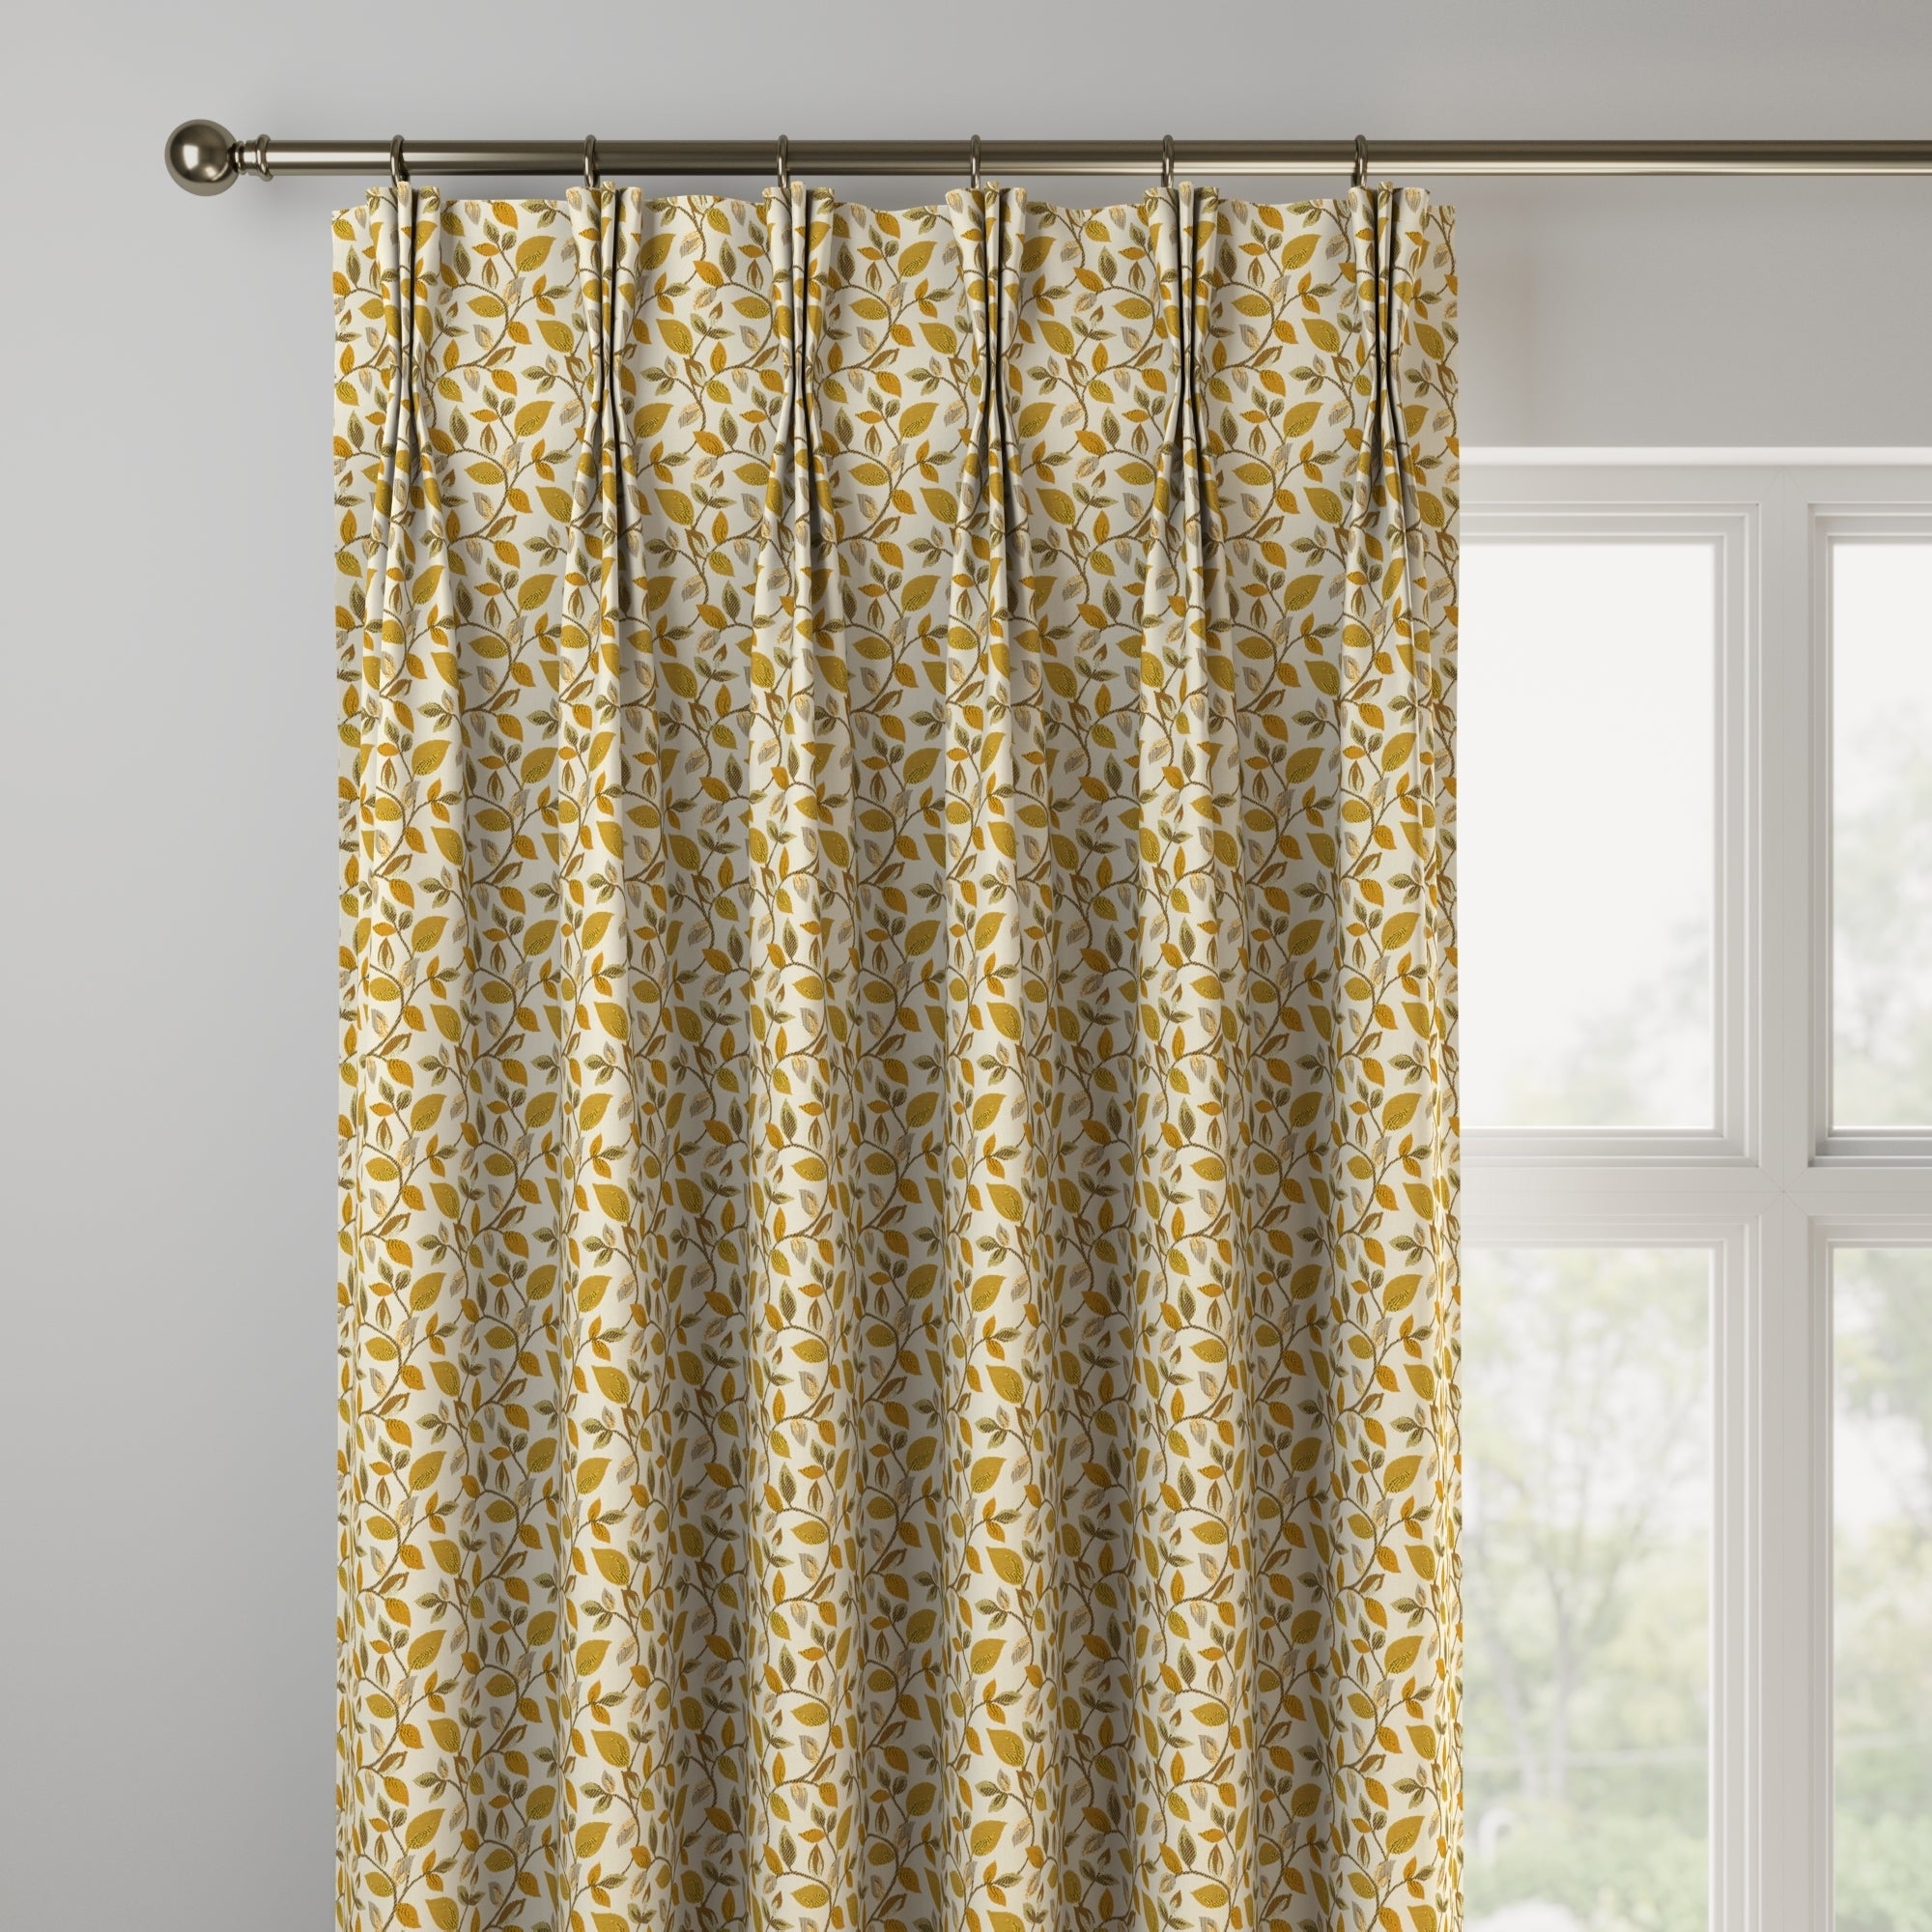 Vercelli Made to Measure Curtains | Dunelm